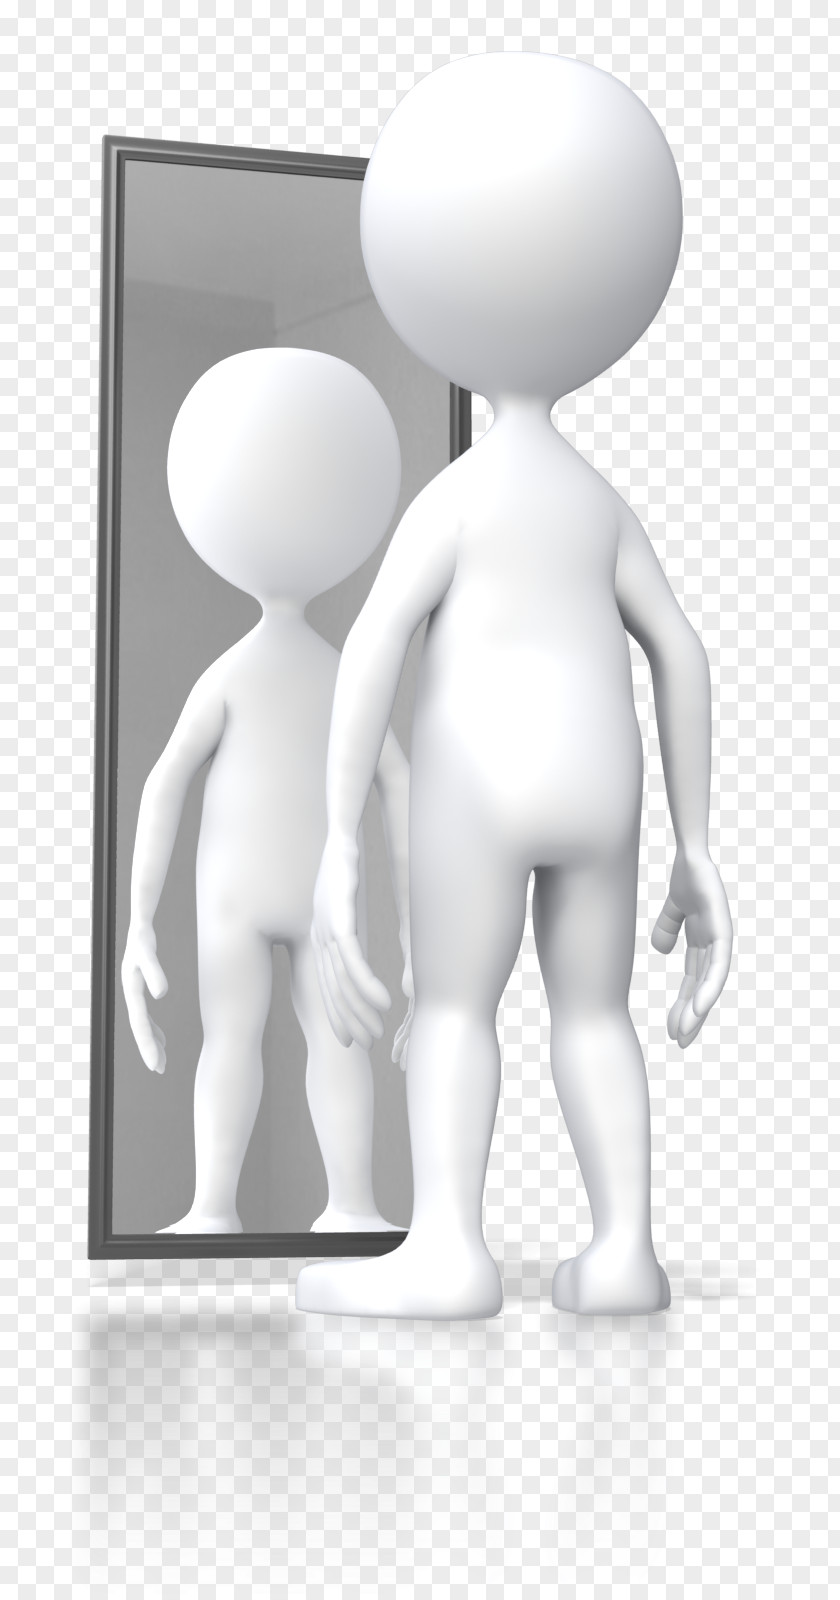 Mirror Stick Figure Animation Reflection PNG